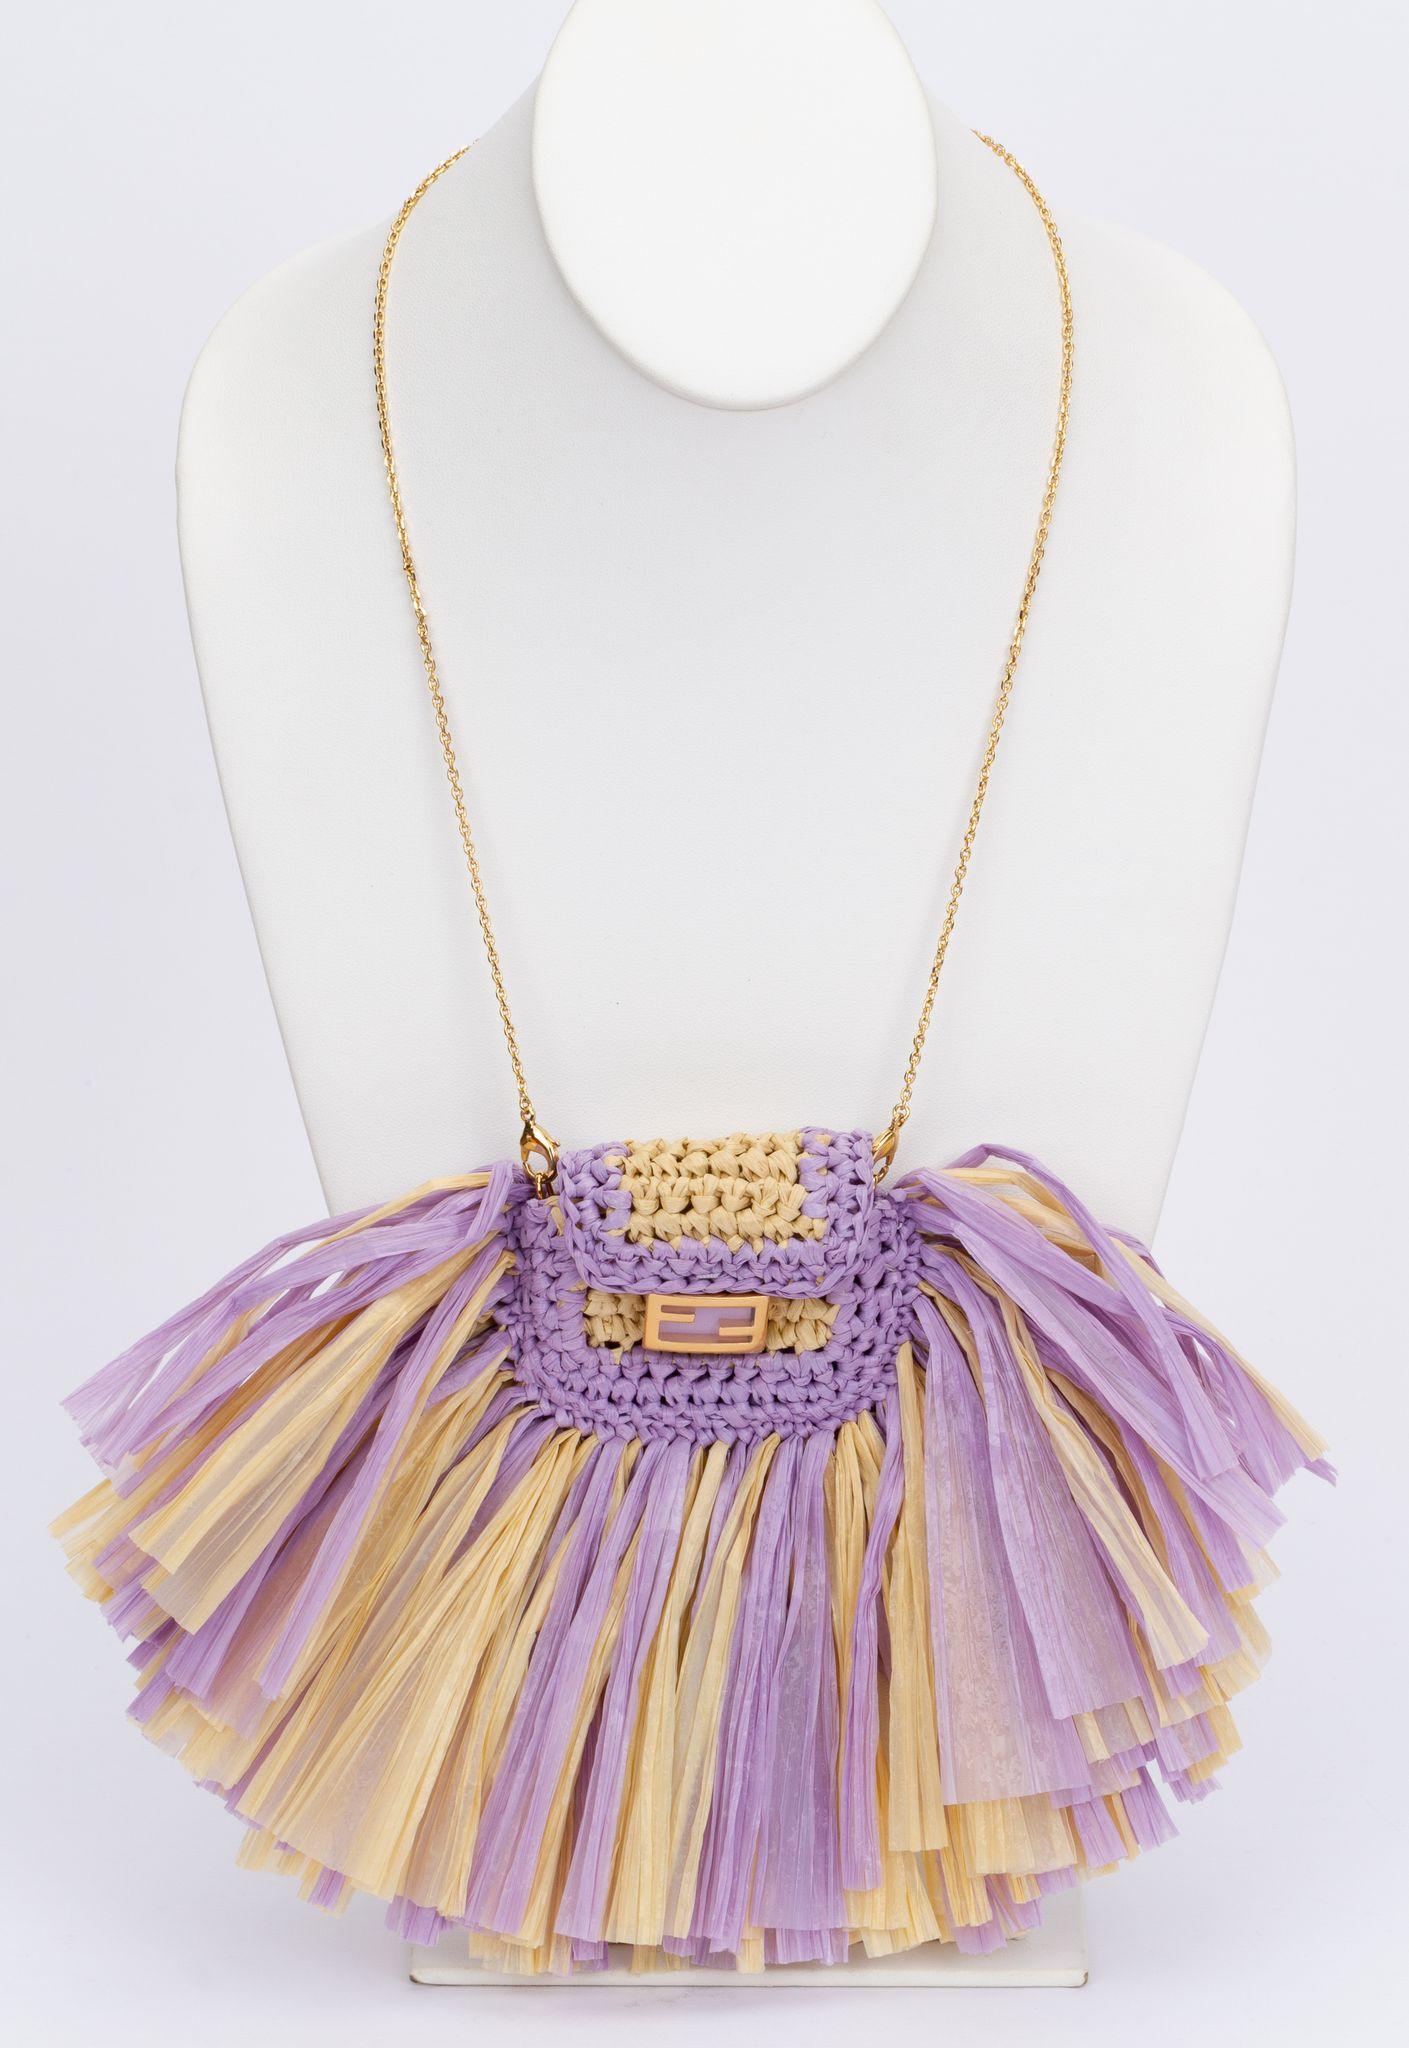 Fendi new in box raffia micro baguette tassel necklace. The center piece of the necklace is a mini Fendi knitted bag on which are multiple tassels in yellow and purple attached. The necklace chain is adjustable and detachable (drop up to 21